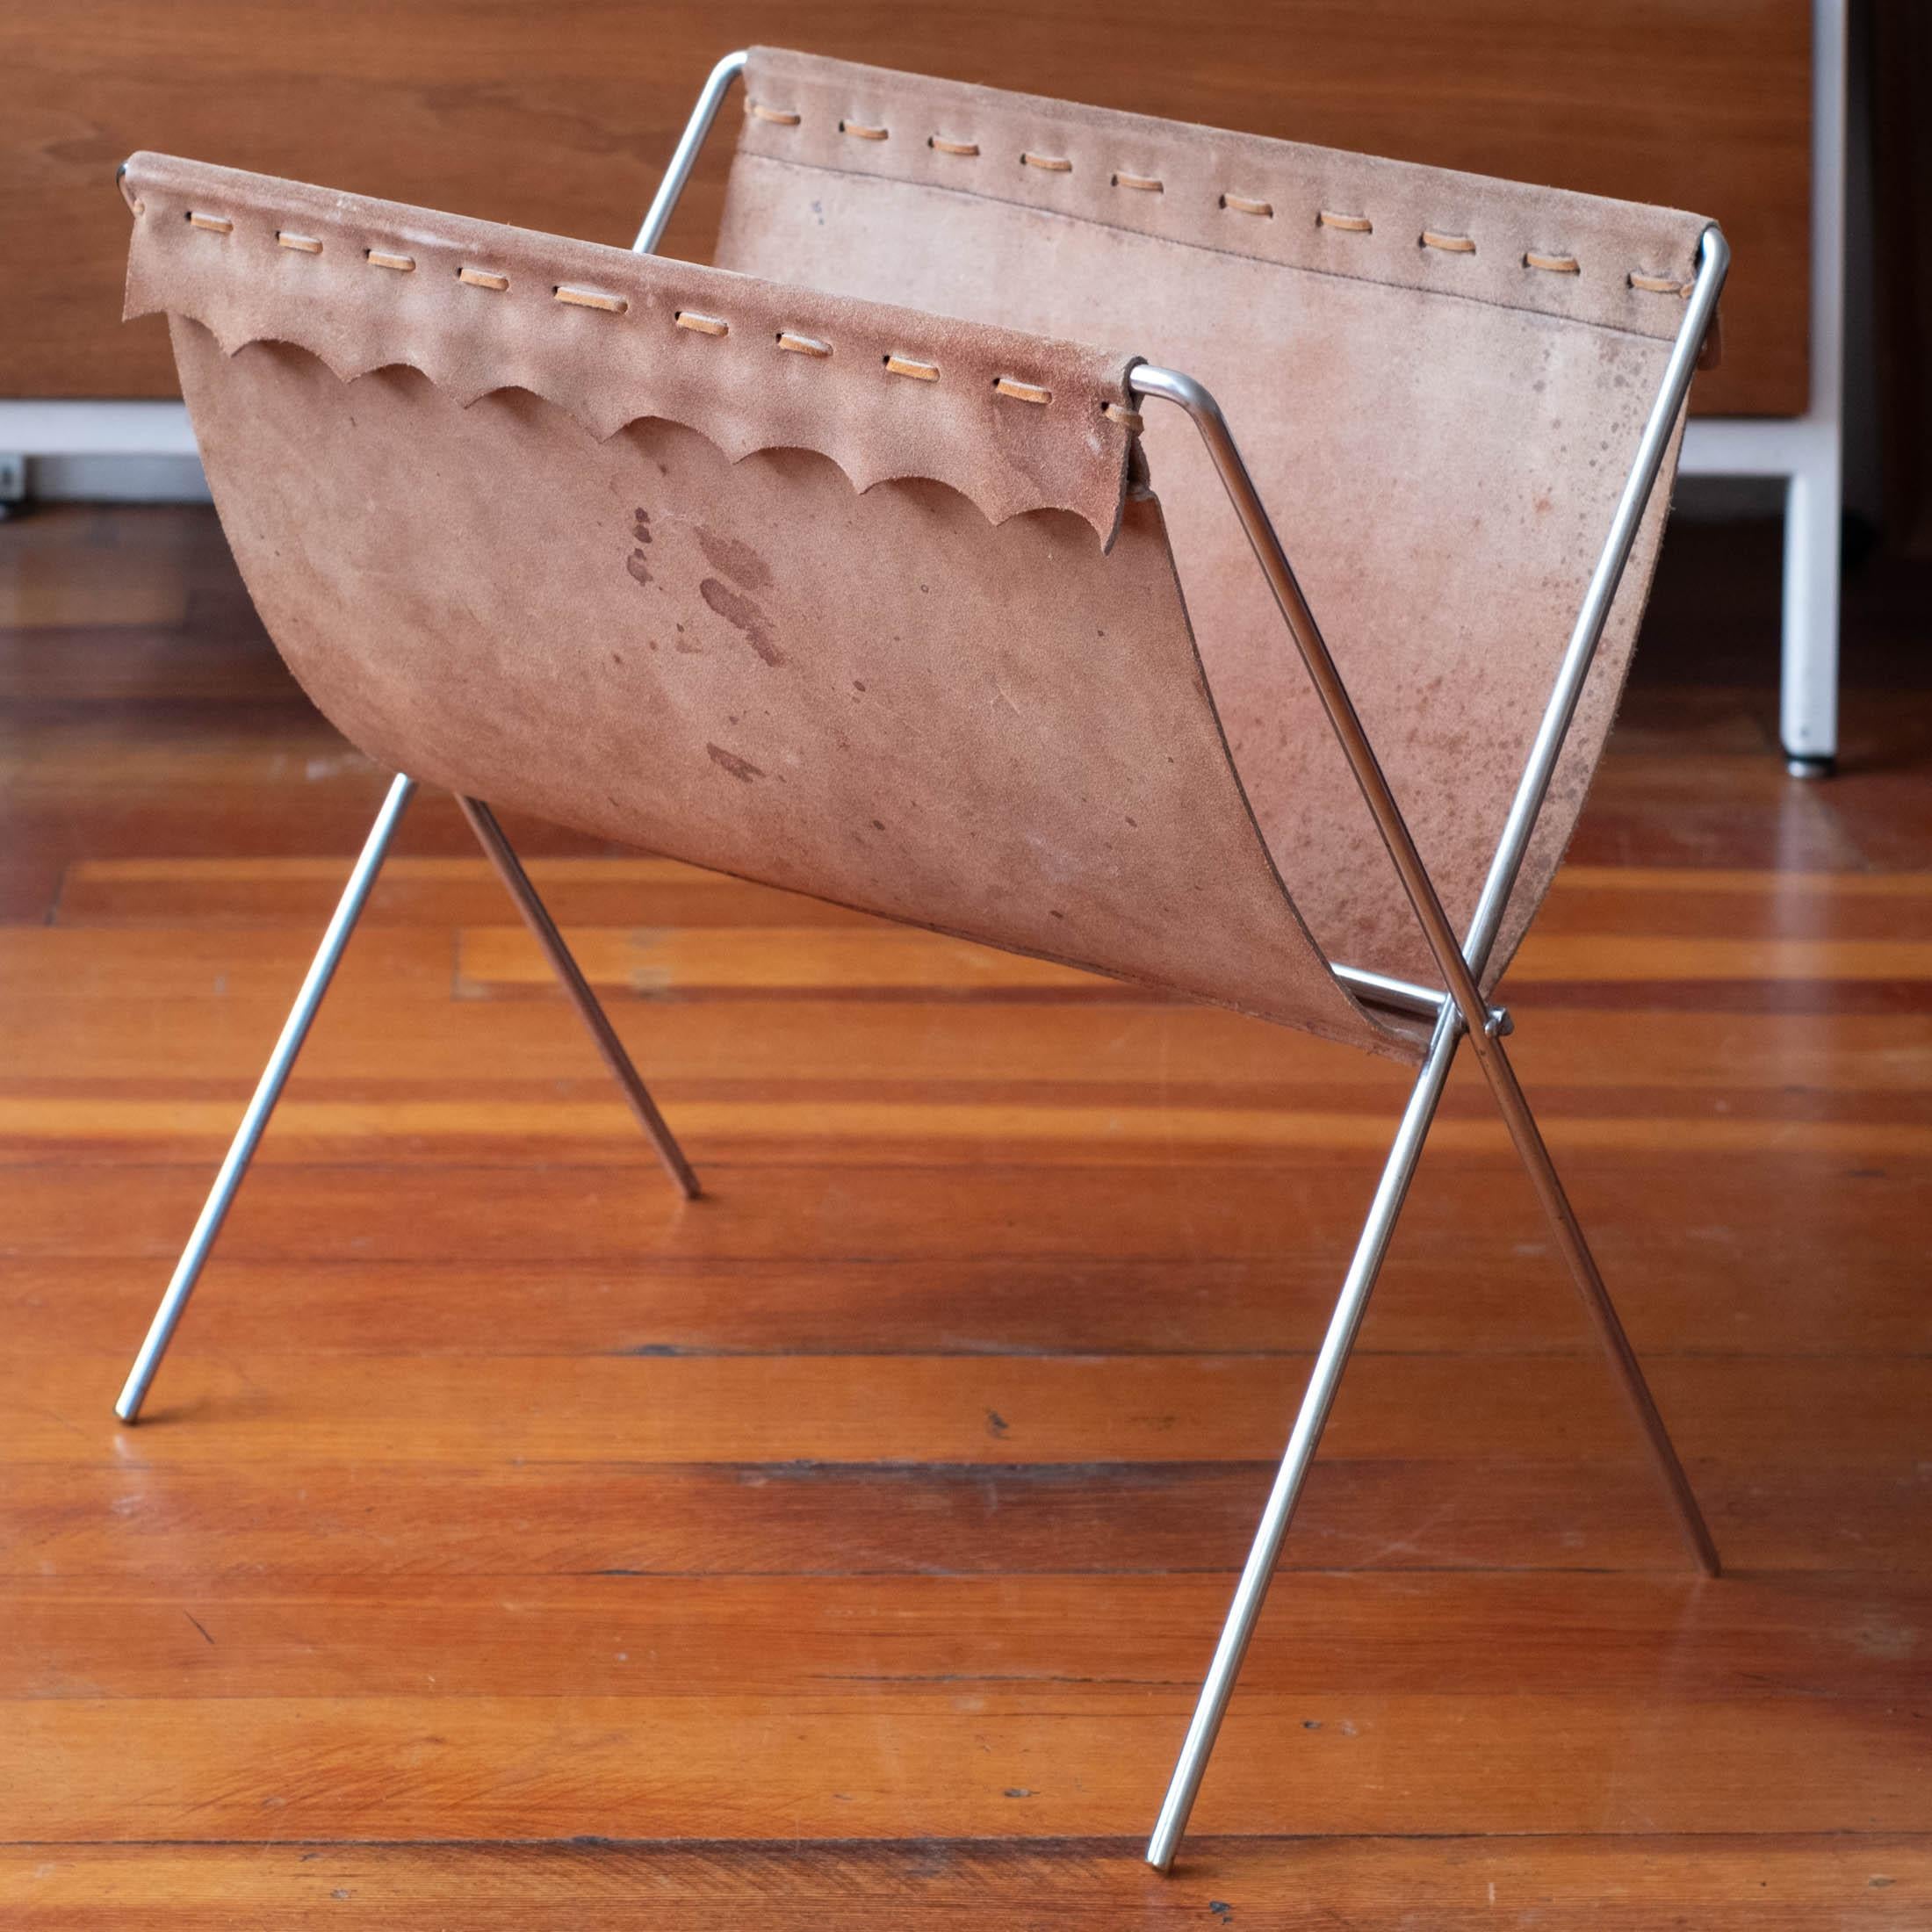 Danish suede leather and metal folding magazine stand, 1960s.